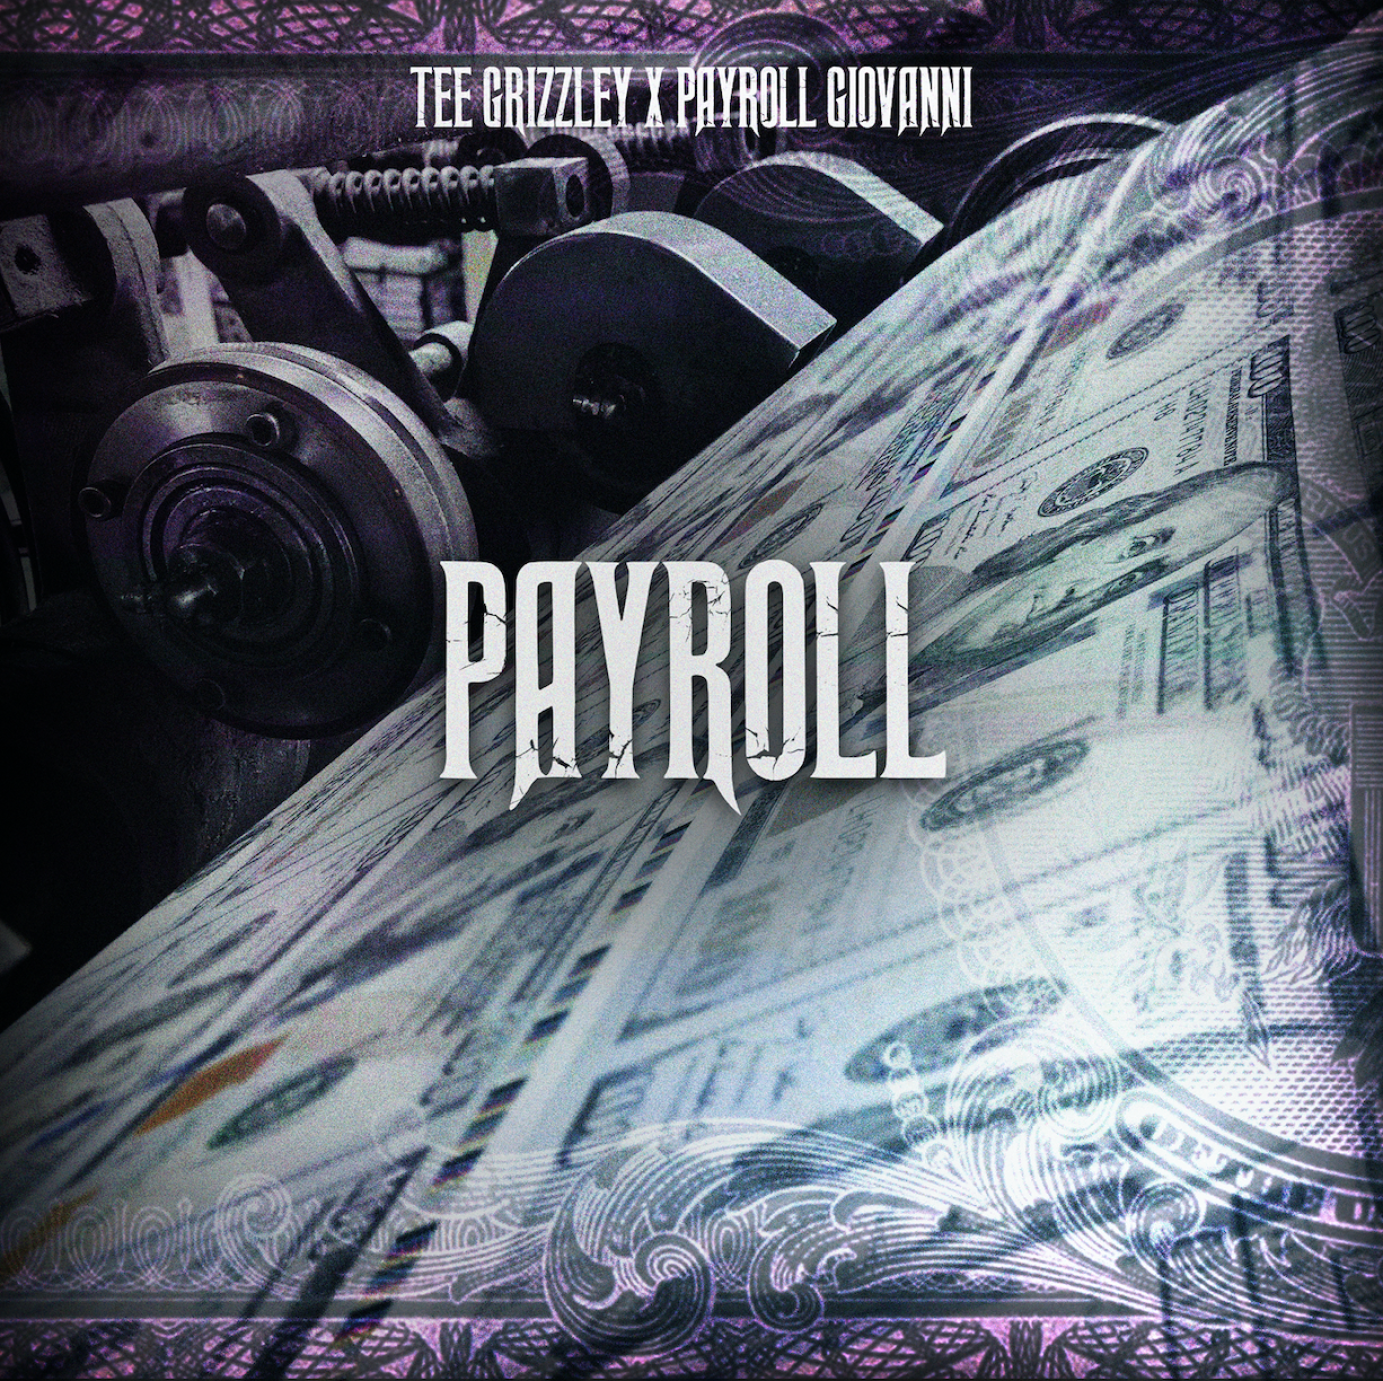 Tee Grizzley ft. Payroll Giovanni - Payroll